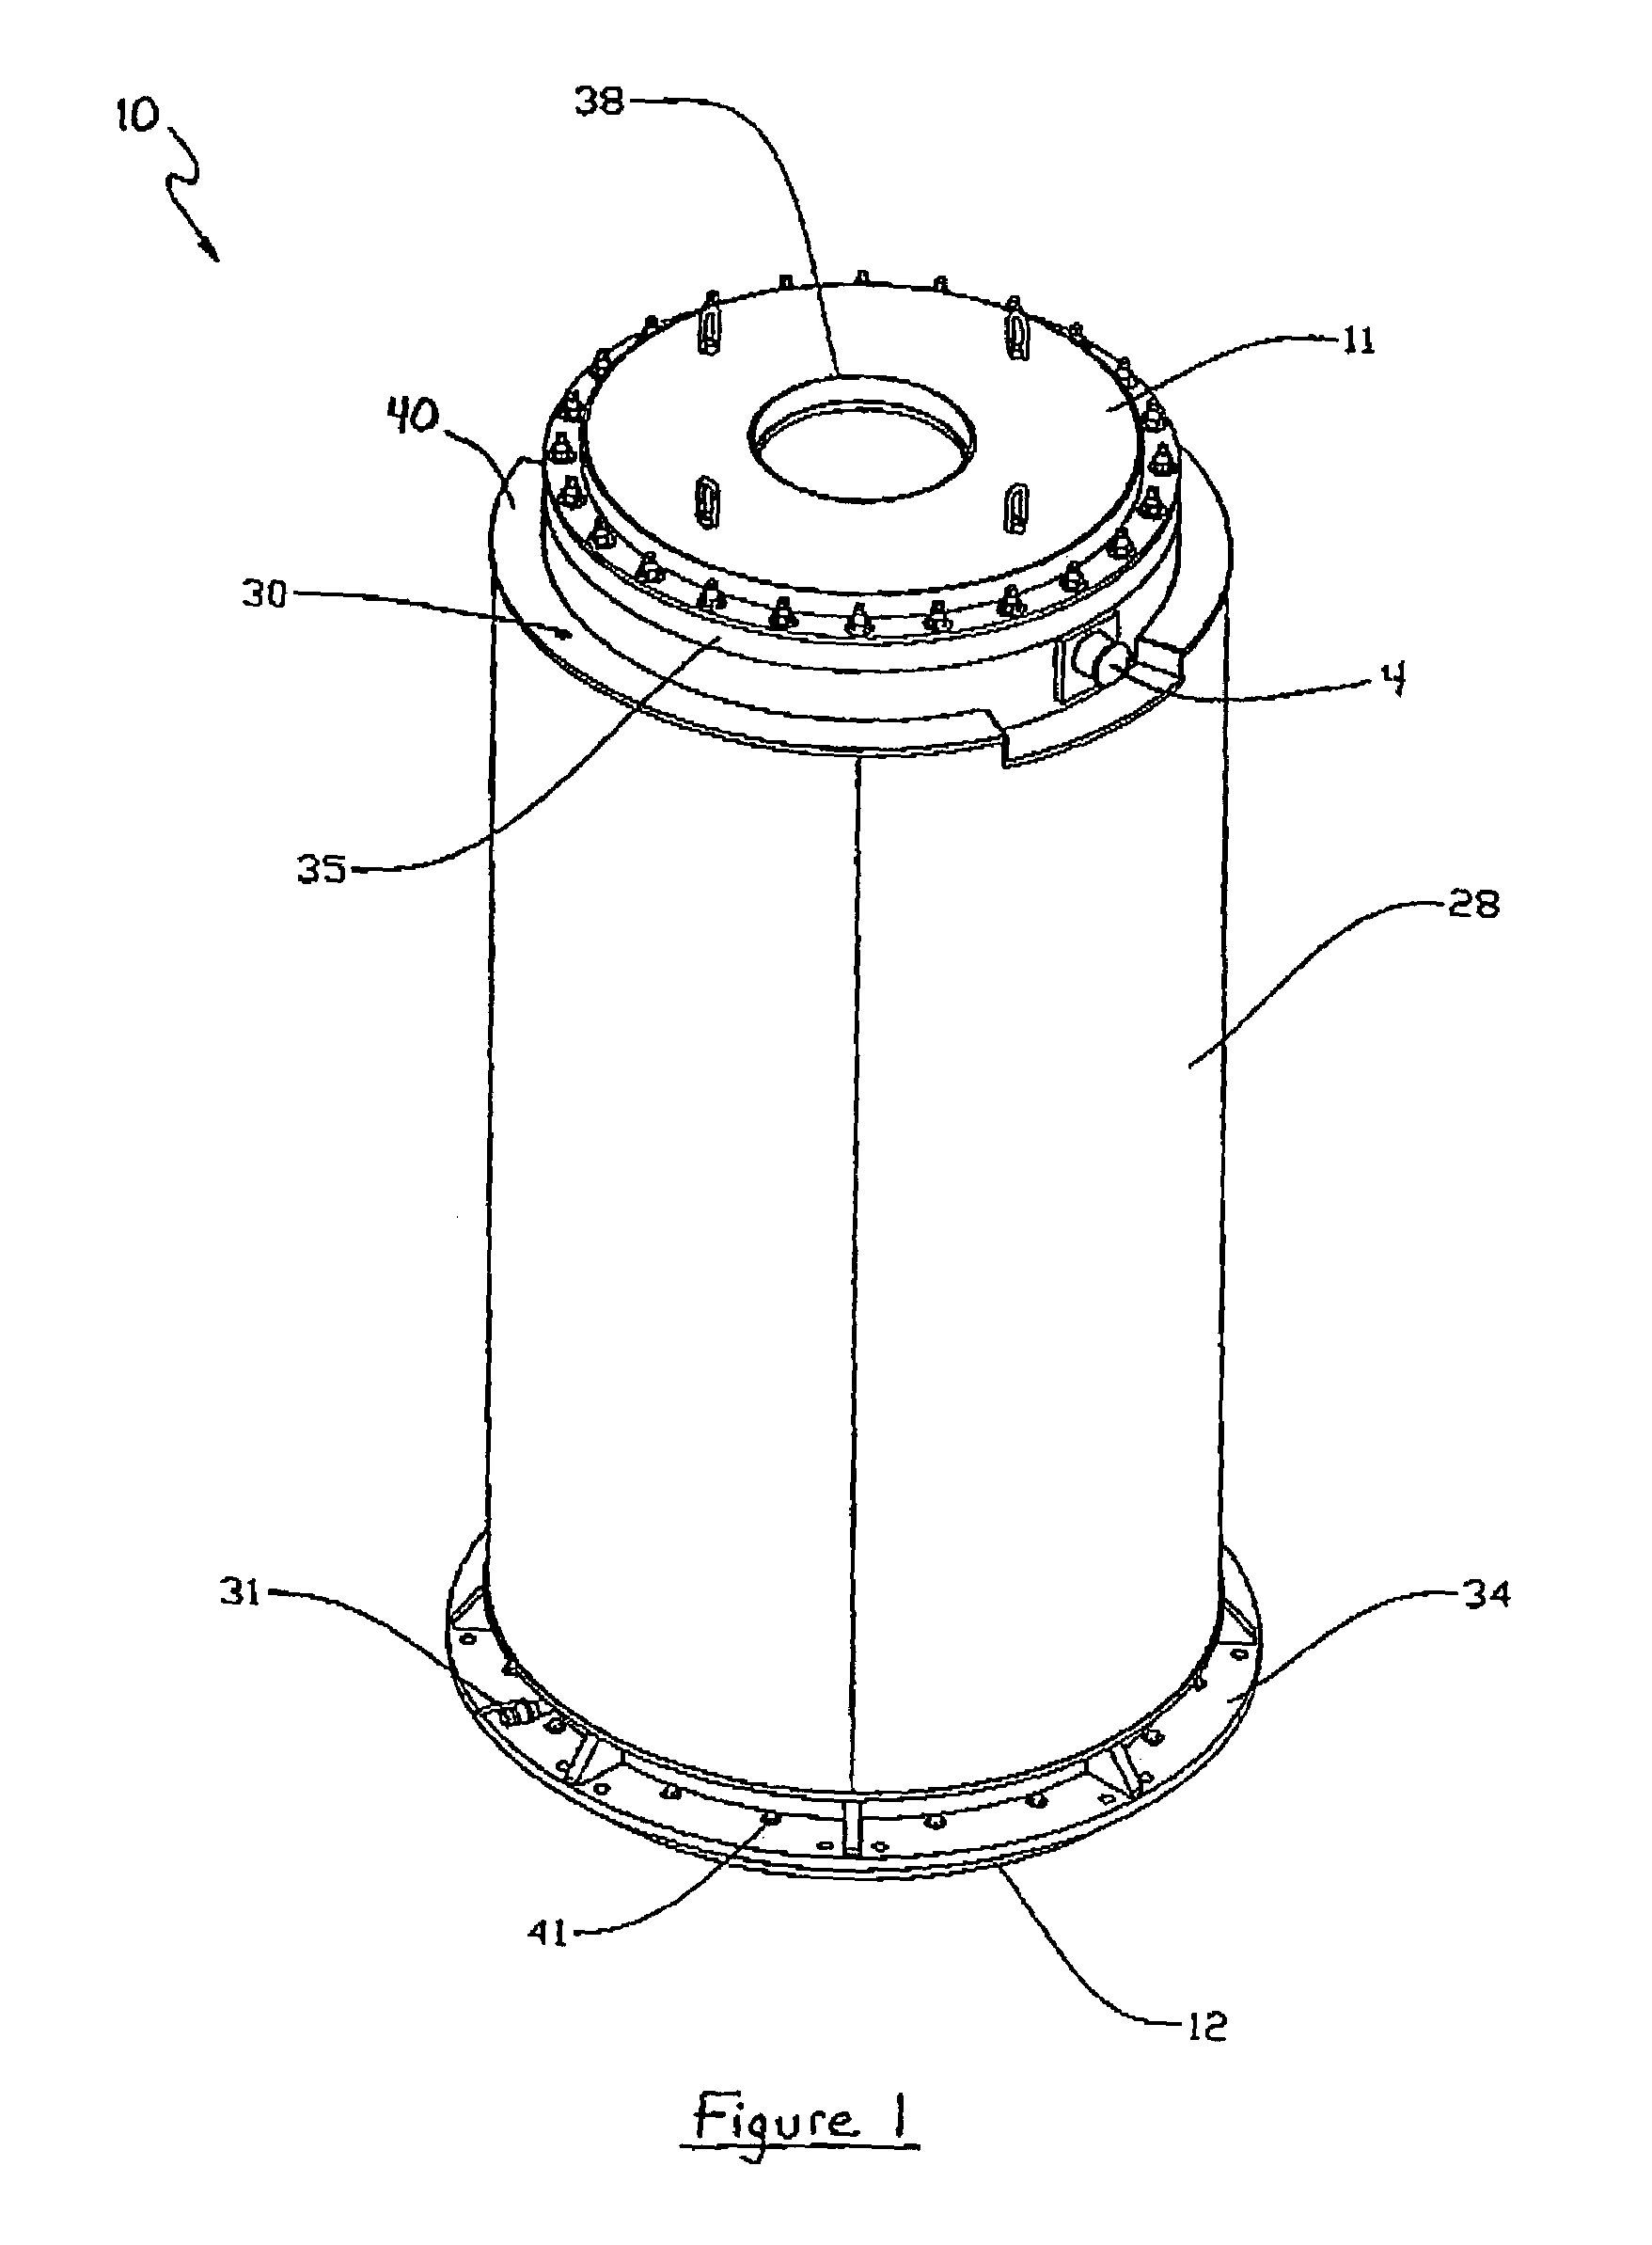 Method and apparatus for maximizing radiation shielding during cask transfer procedures